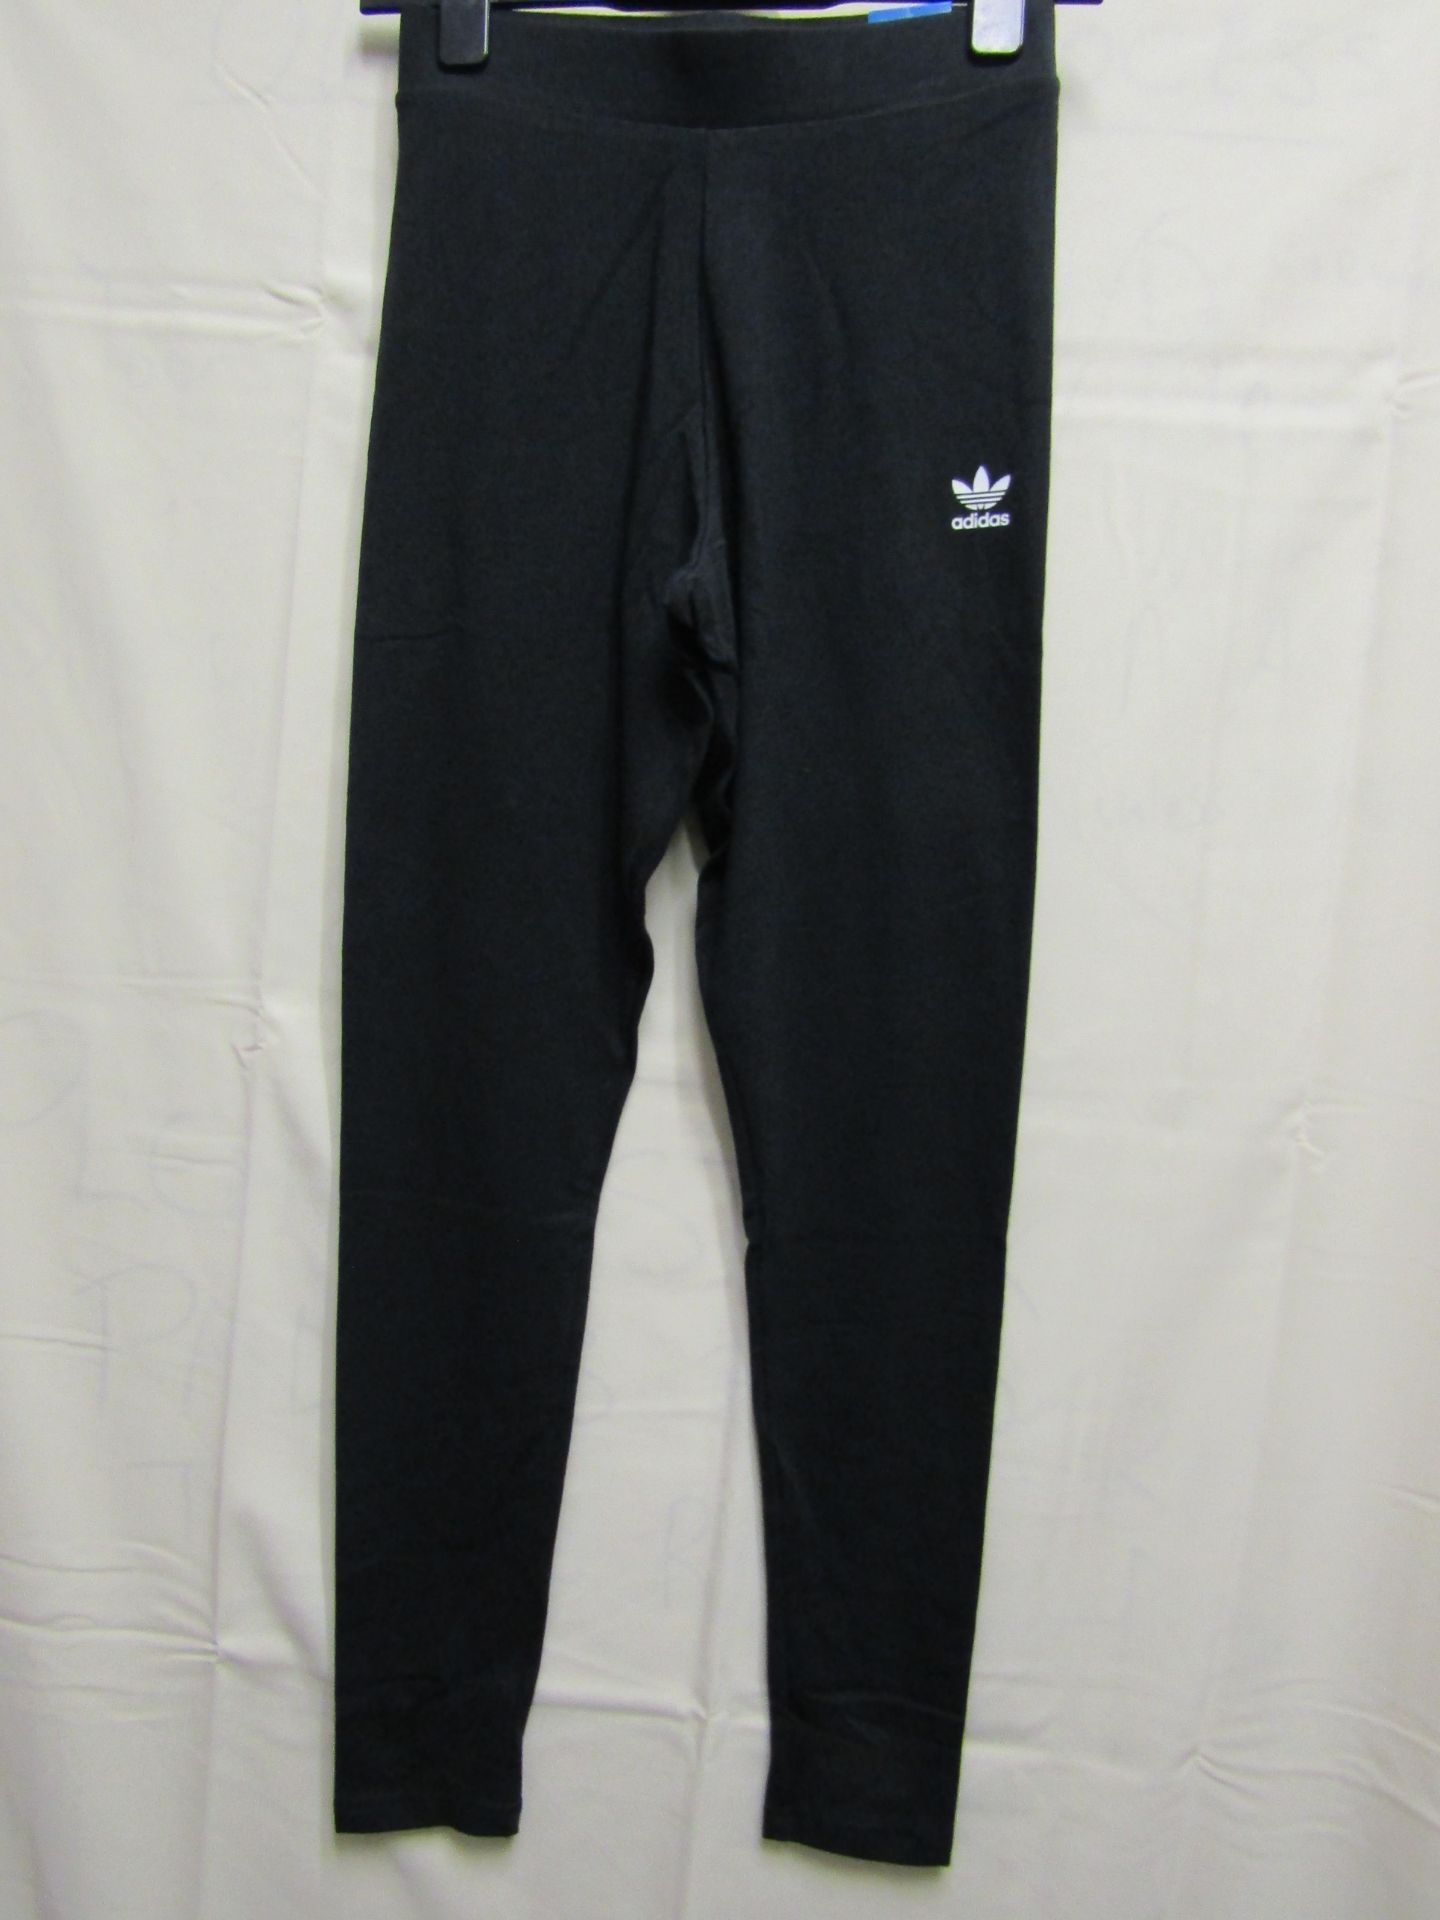 Adidas Running Pants Black Size 10 Mid Rise New With Tags